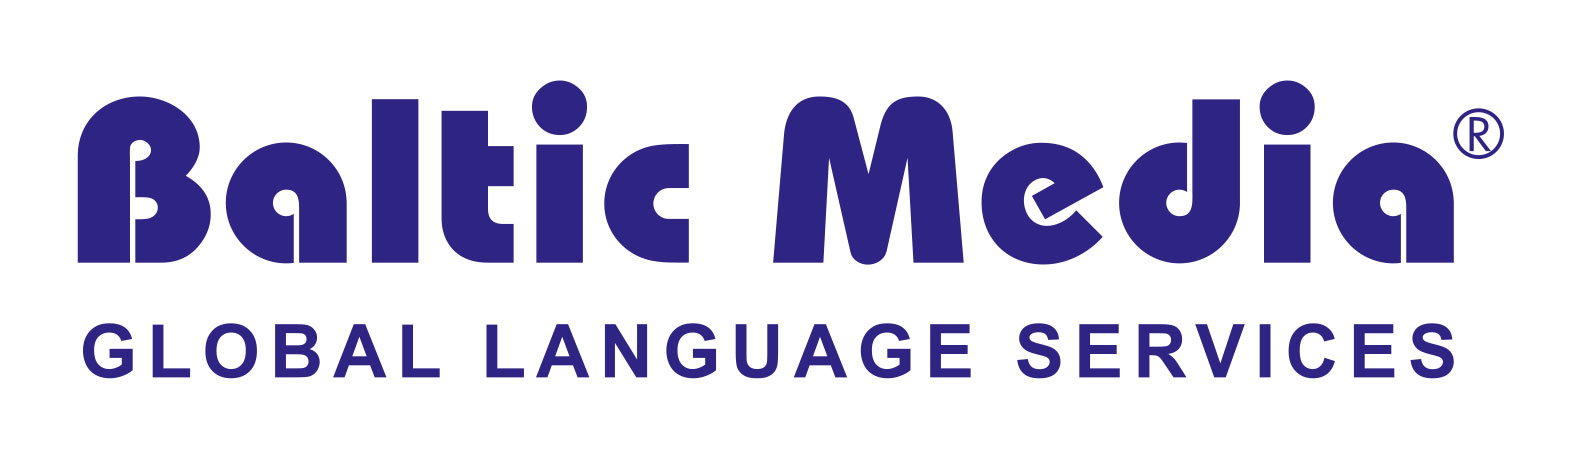 Baltic Media is a leading digital translation and localization company in Northern Europe specialising in all Nordic and Baltic languages and offers the best translation solutions for your business in this region.| Translation Agency Baltic Media